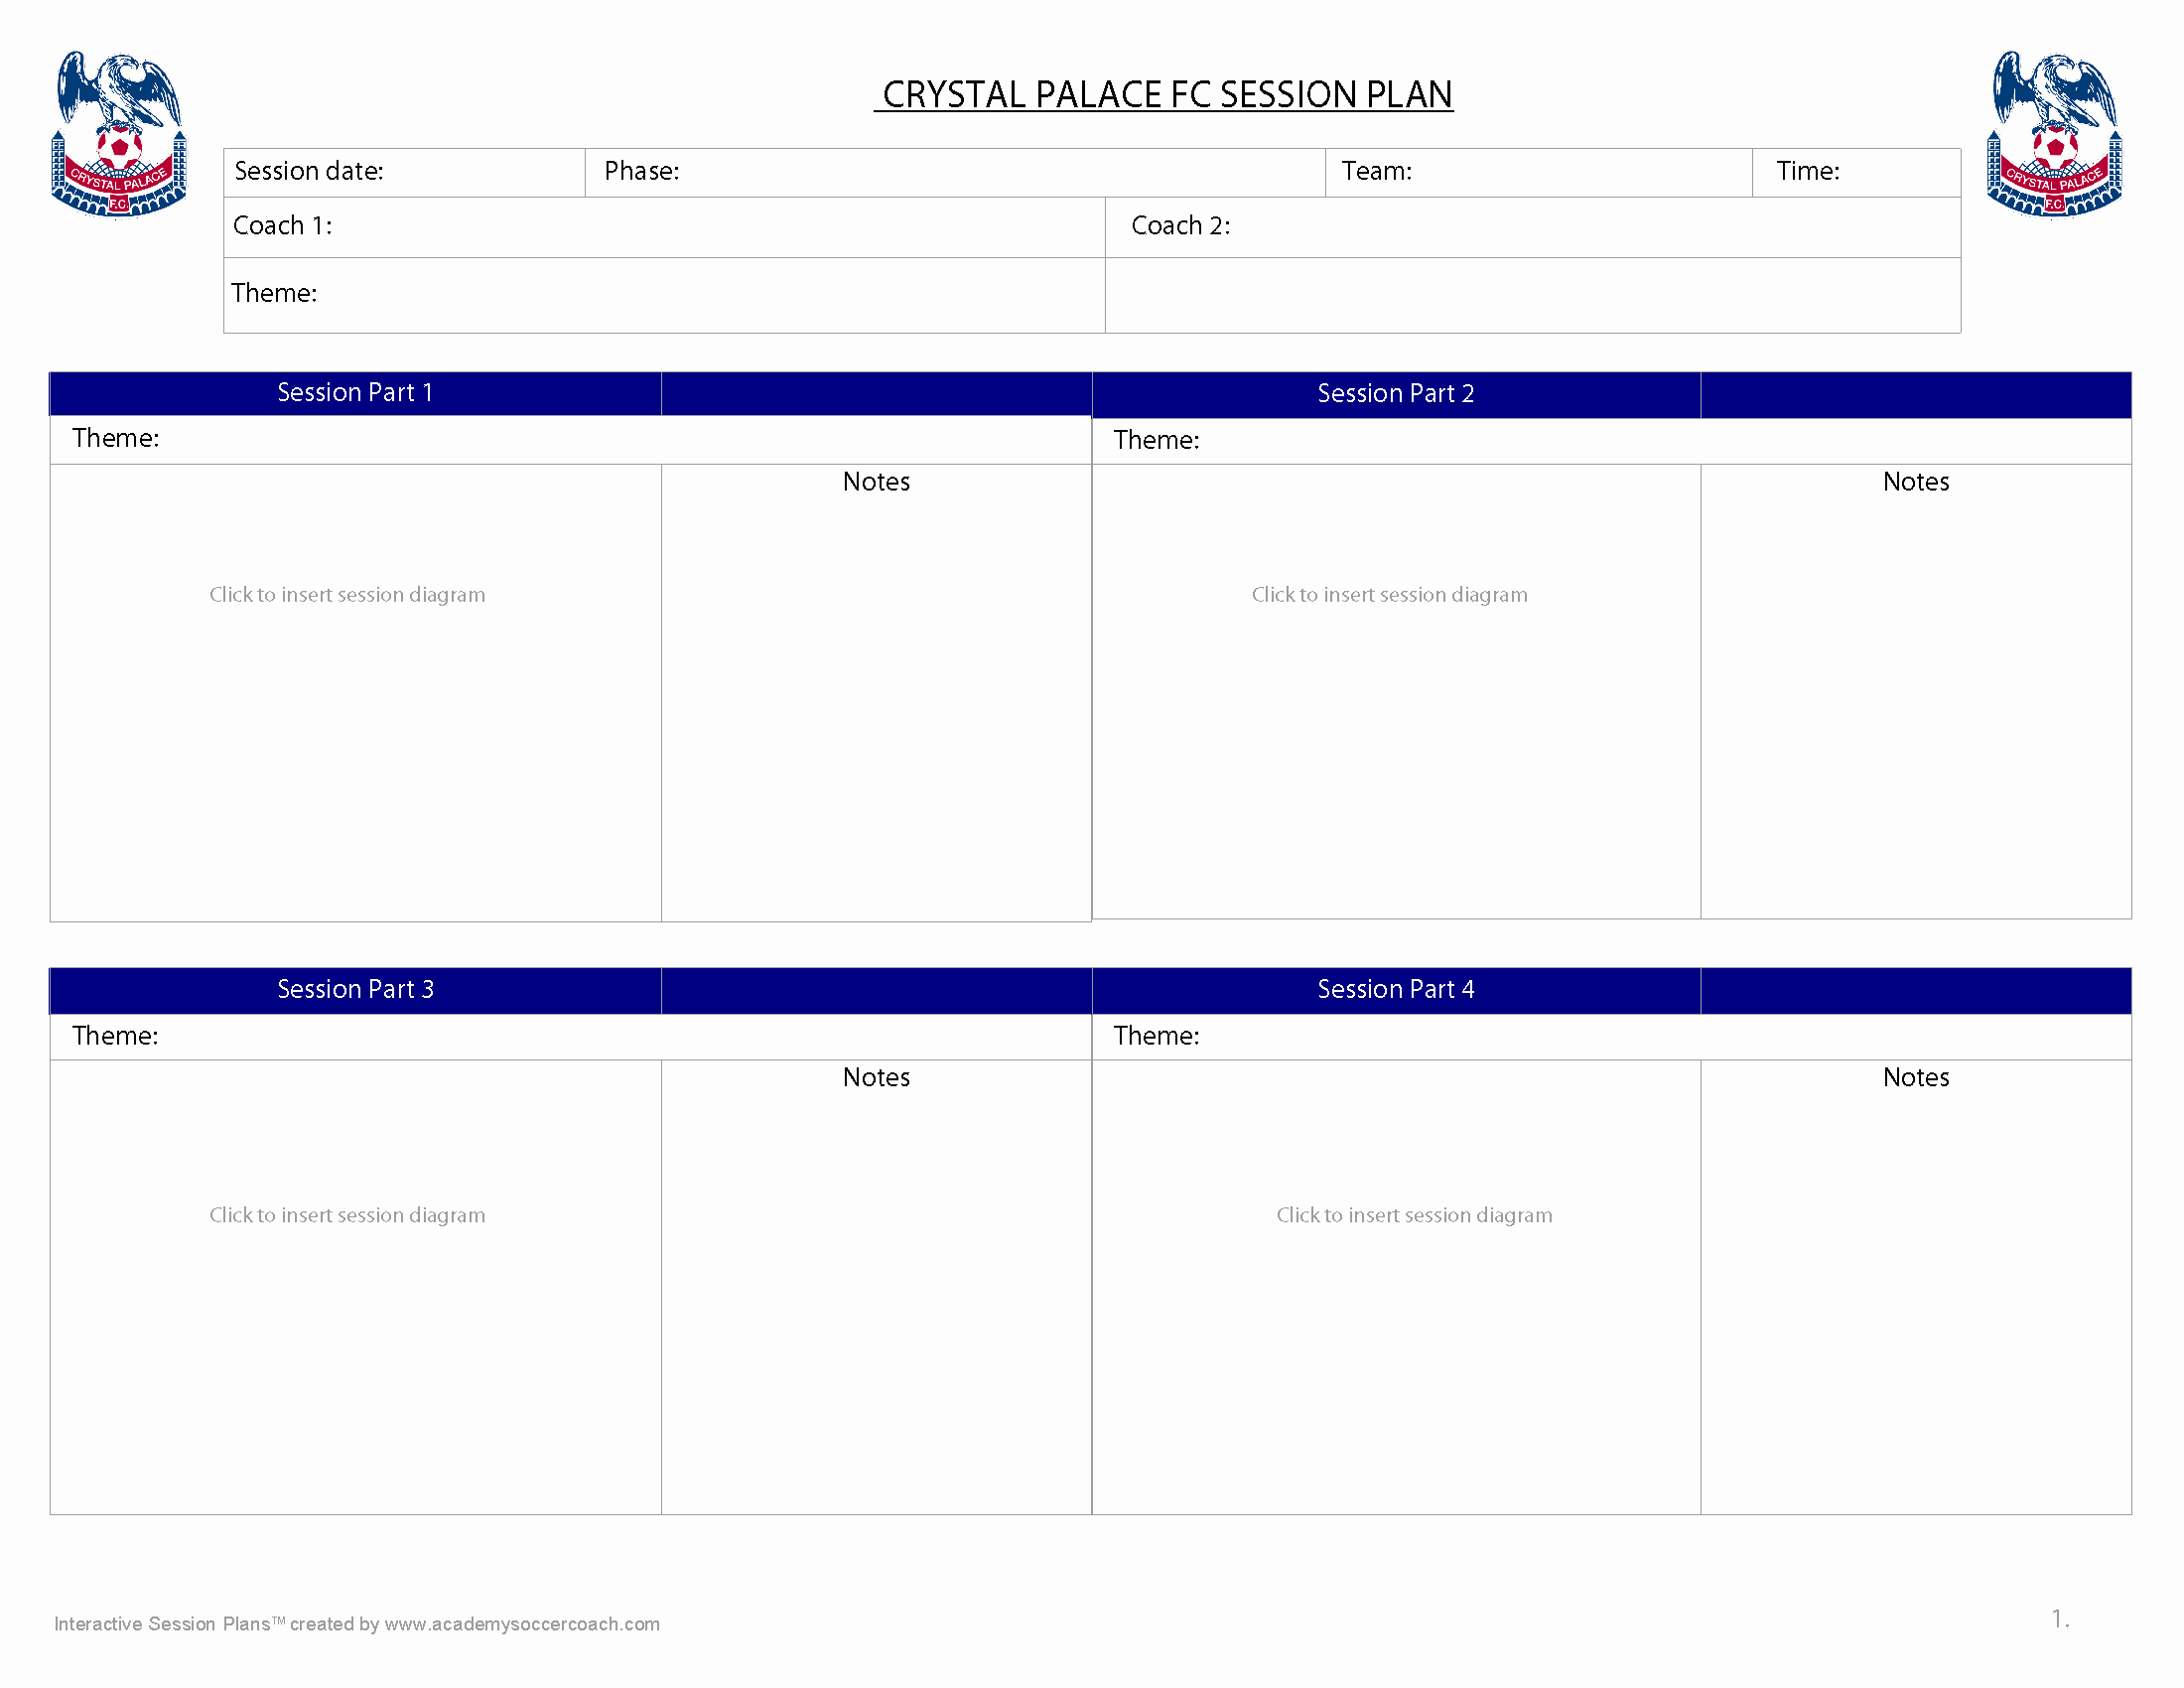 Soccer Session Plan Template Beautiful Interactive Session Plans™ Academy soccer Coach